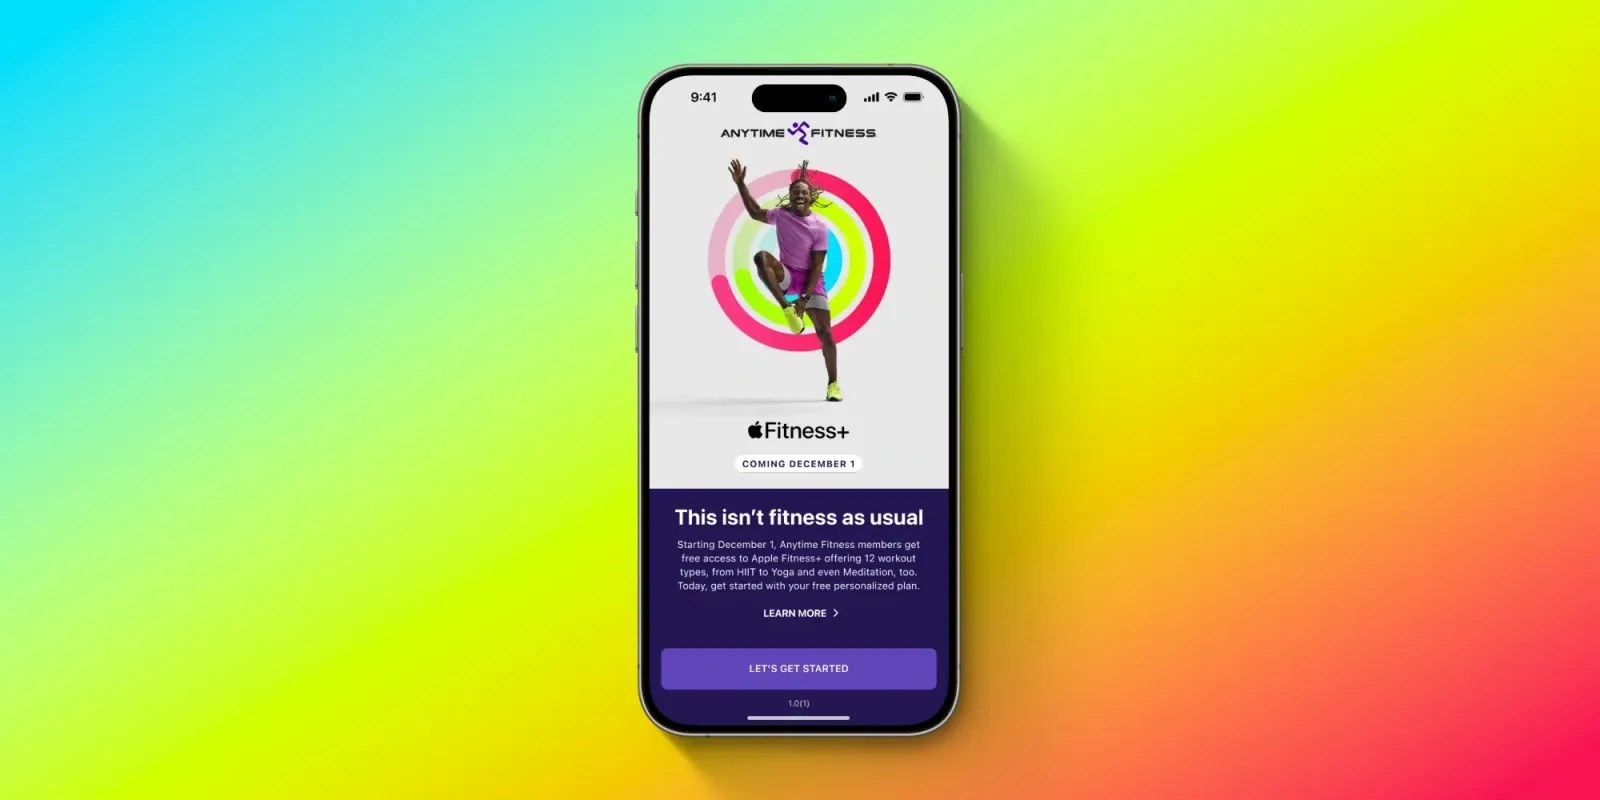 Apple Fitness+ is free for Anytime Fitness members